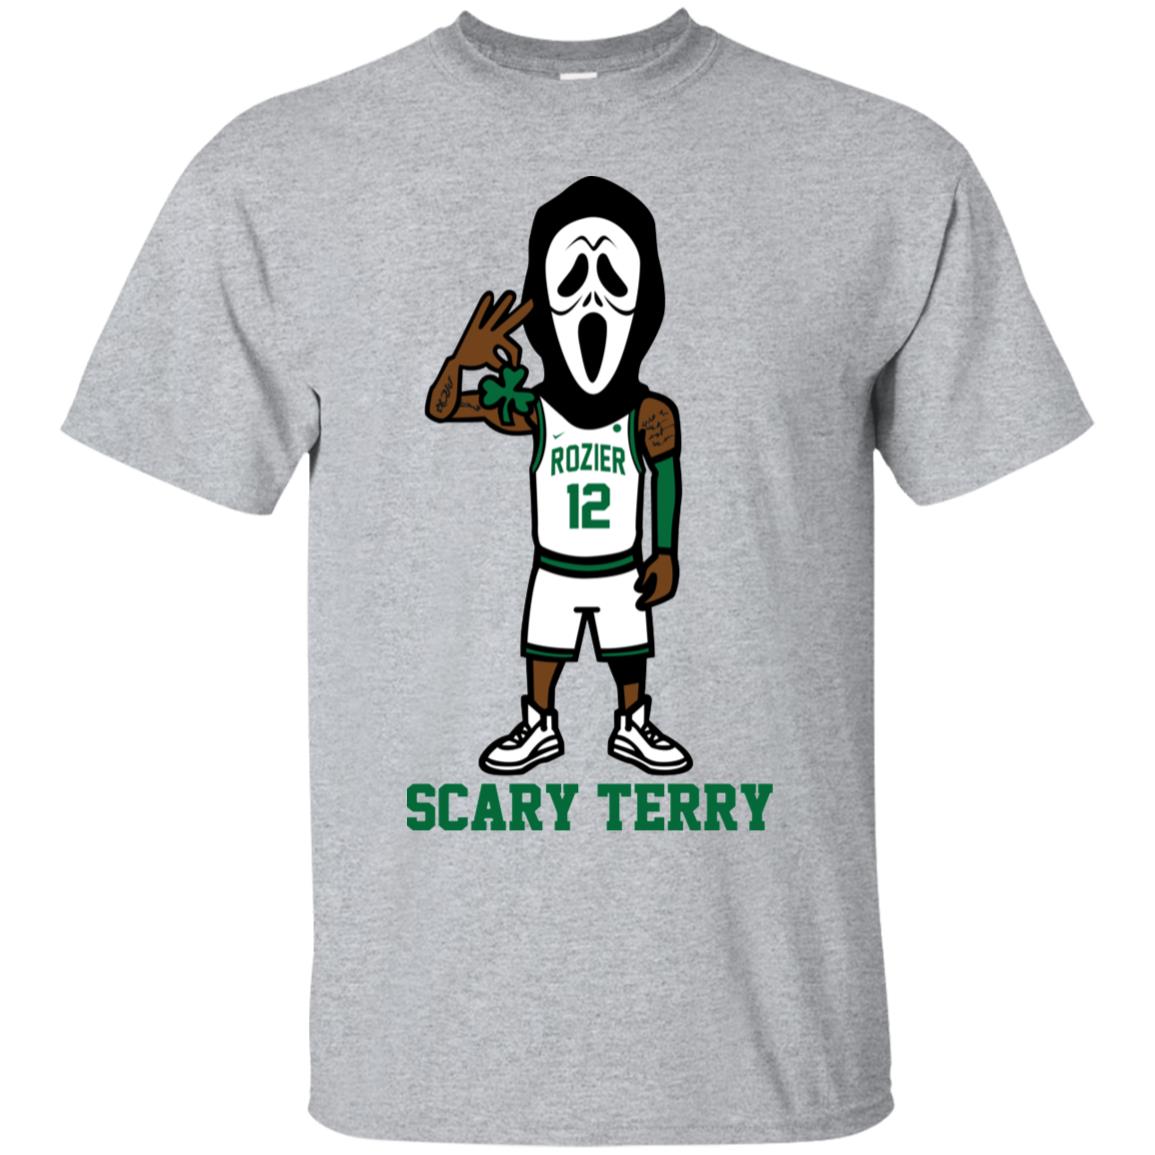 Costume company sues Celtics' 'Scary' Terry Rozier alleging he